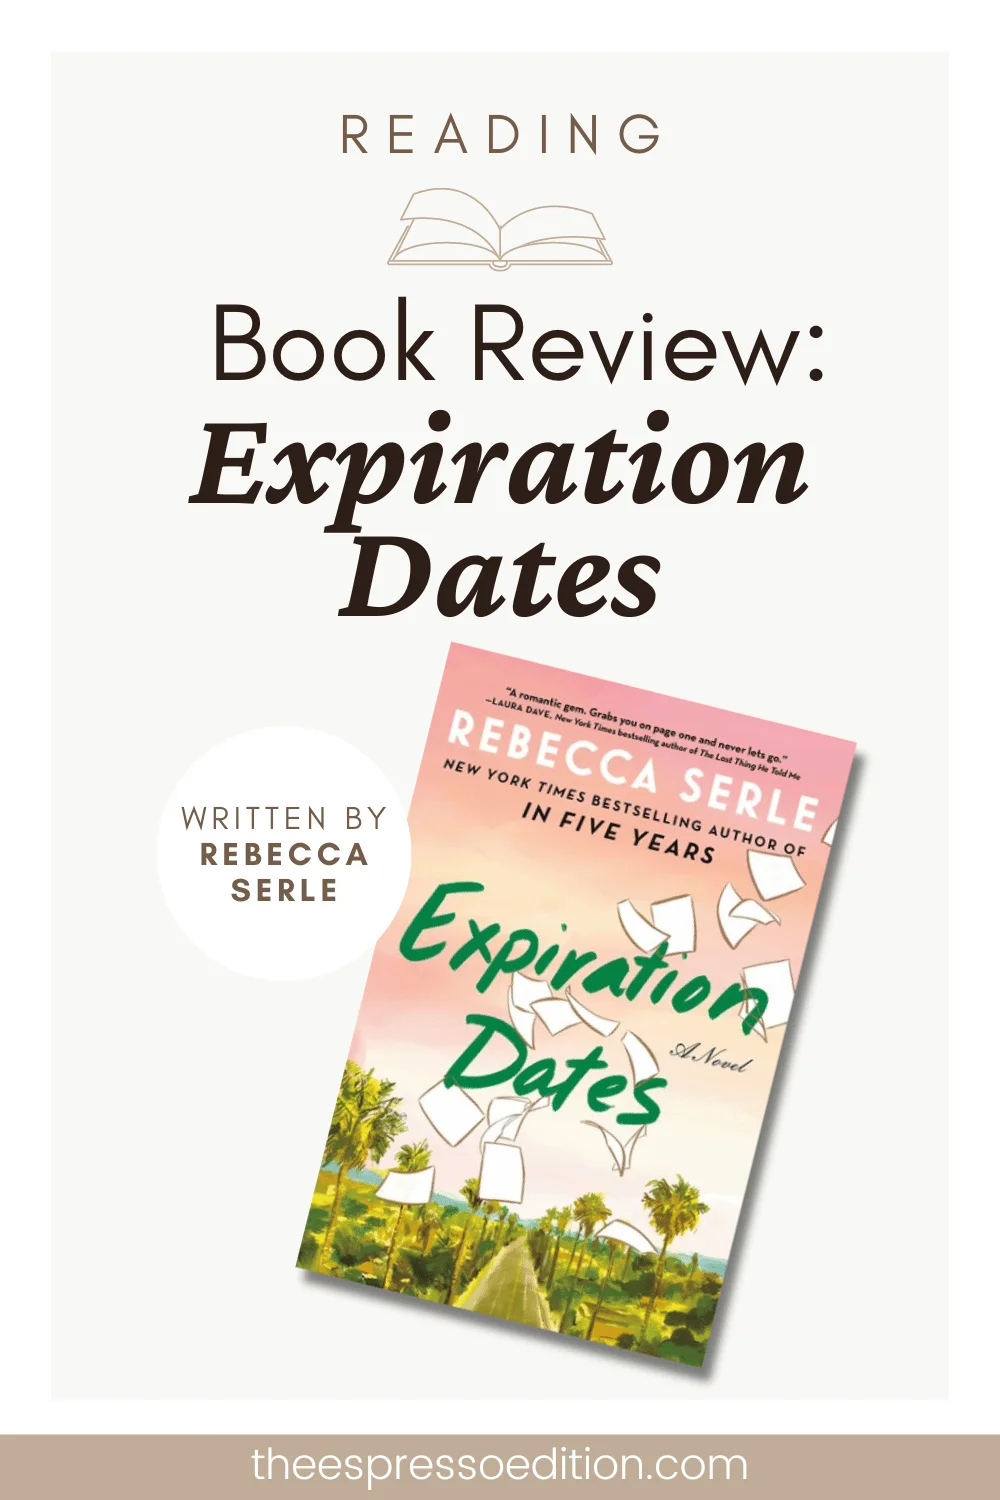 Book Review: Expiration Dates by Rebecca Serle by The Espresso Edition cozy bookish blog